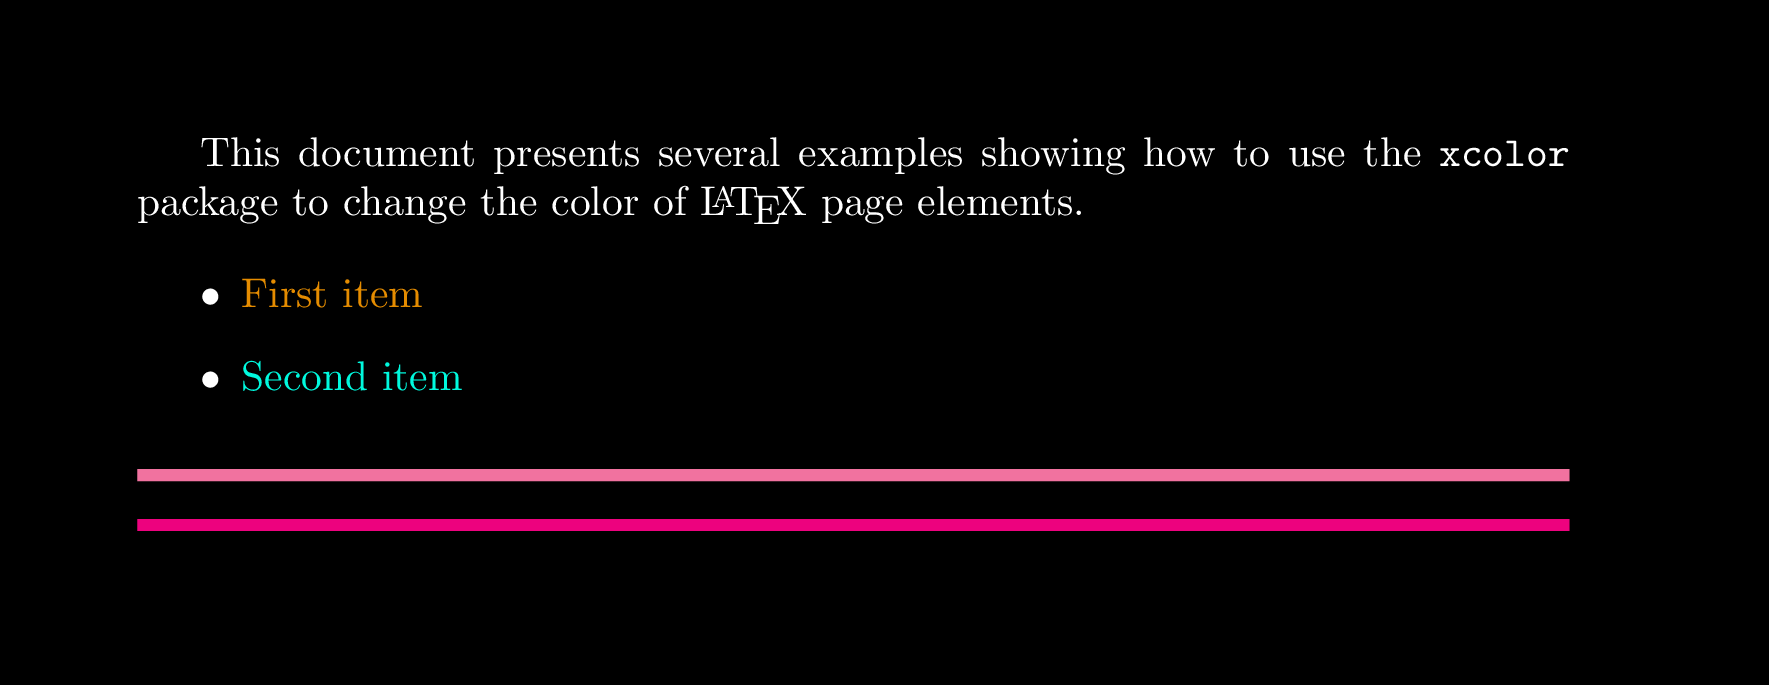 Setting the page background color in LaTex